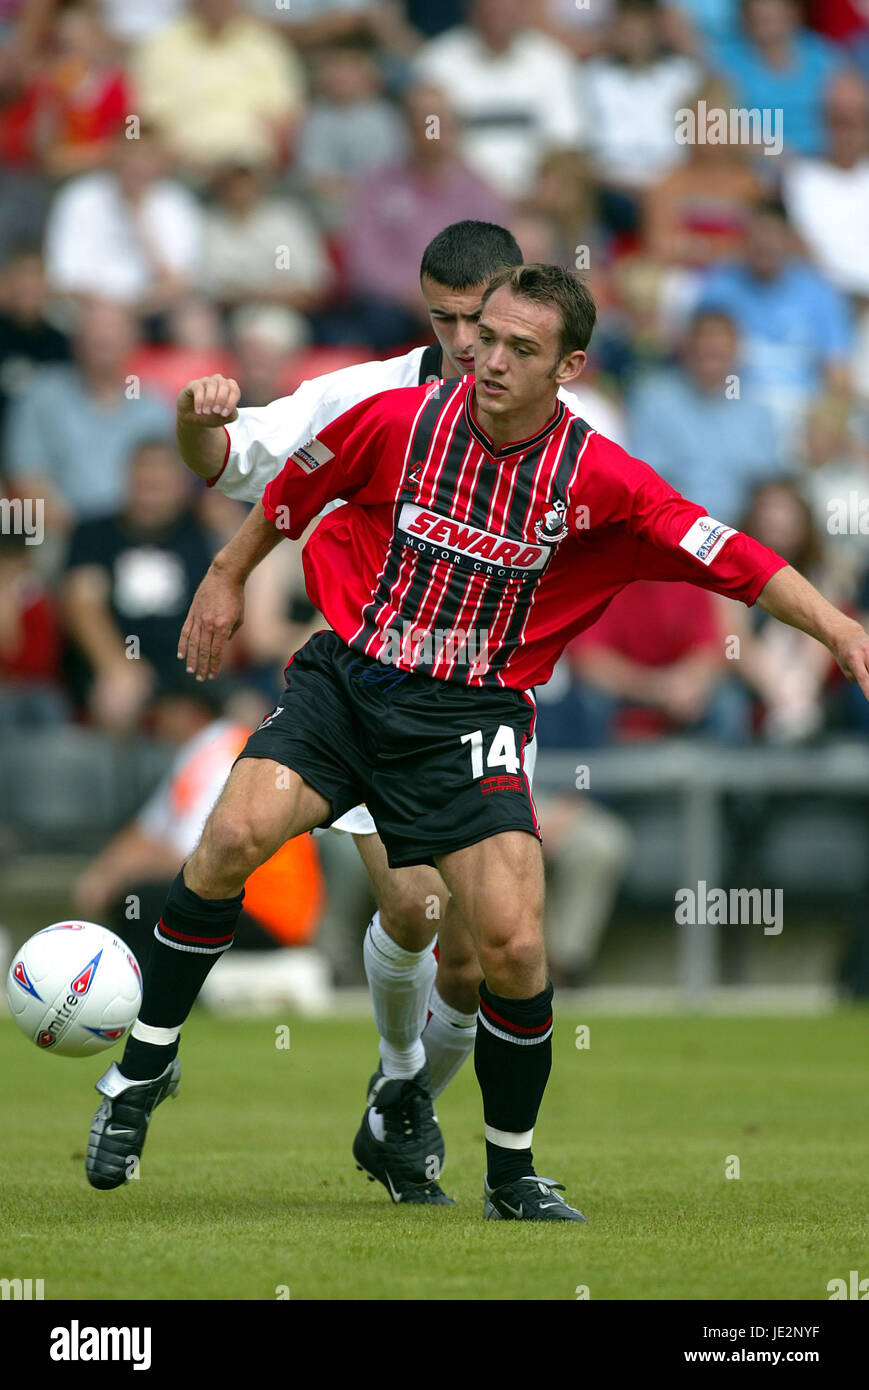 JAMES HAYTER BOURNMOUTH BOURNMOUTH AFC 27 Juillet 2002 Banque D'Images